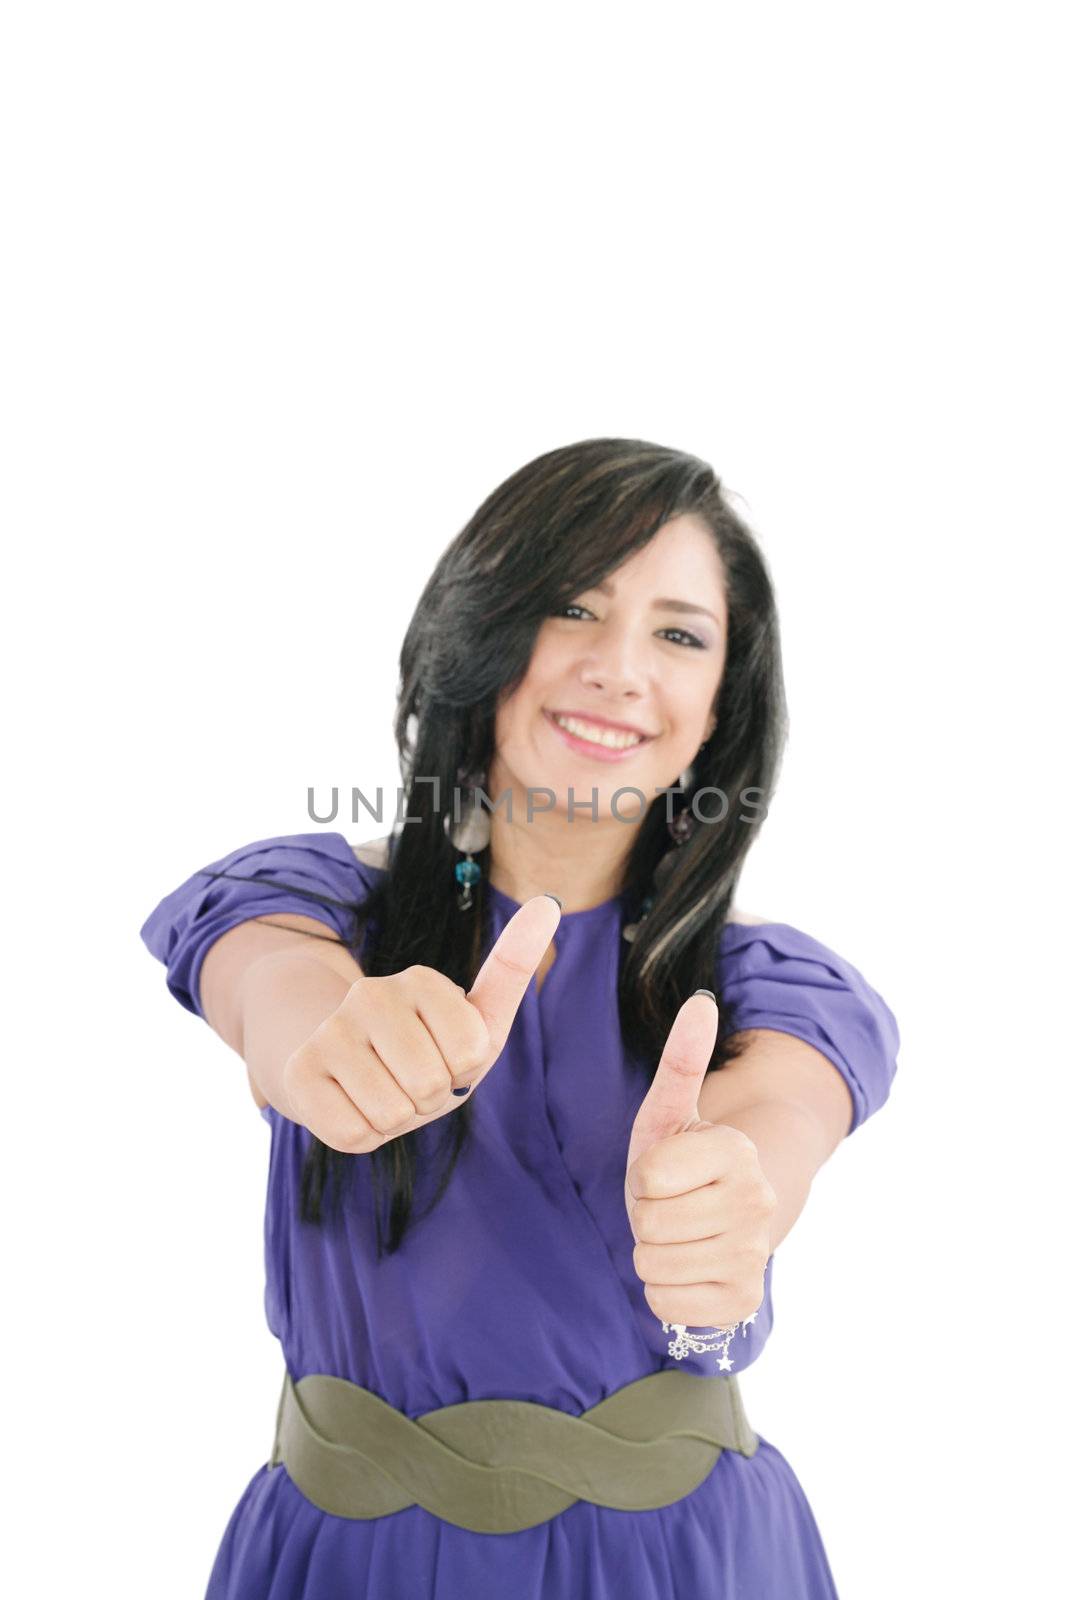 Smiling woman with thumbs up. Focus in the hands by dacasdo